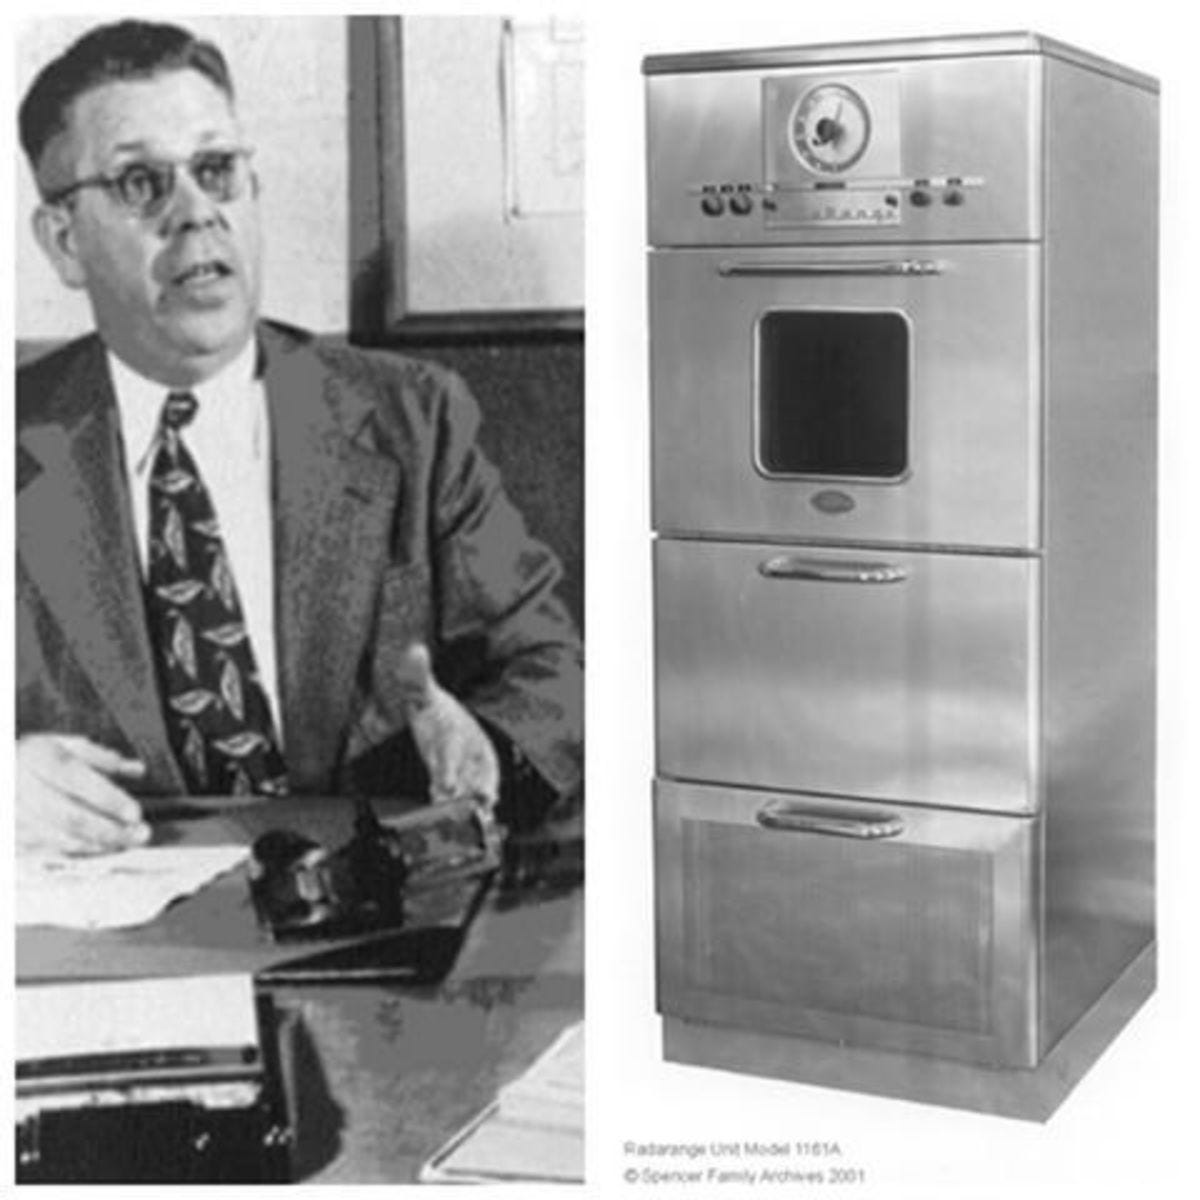 The first microwave designed by Percy Spencer